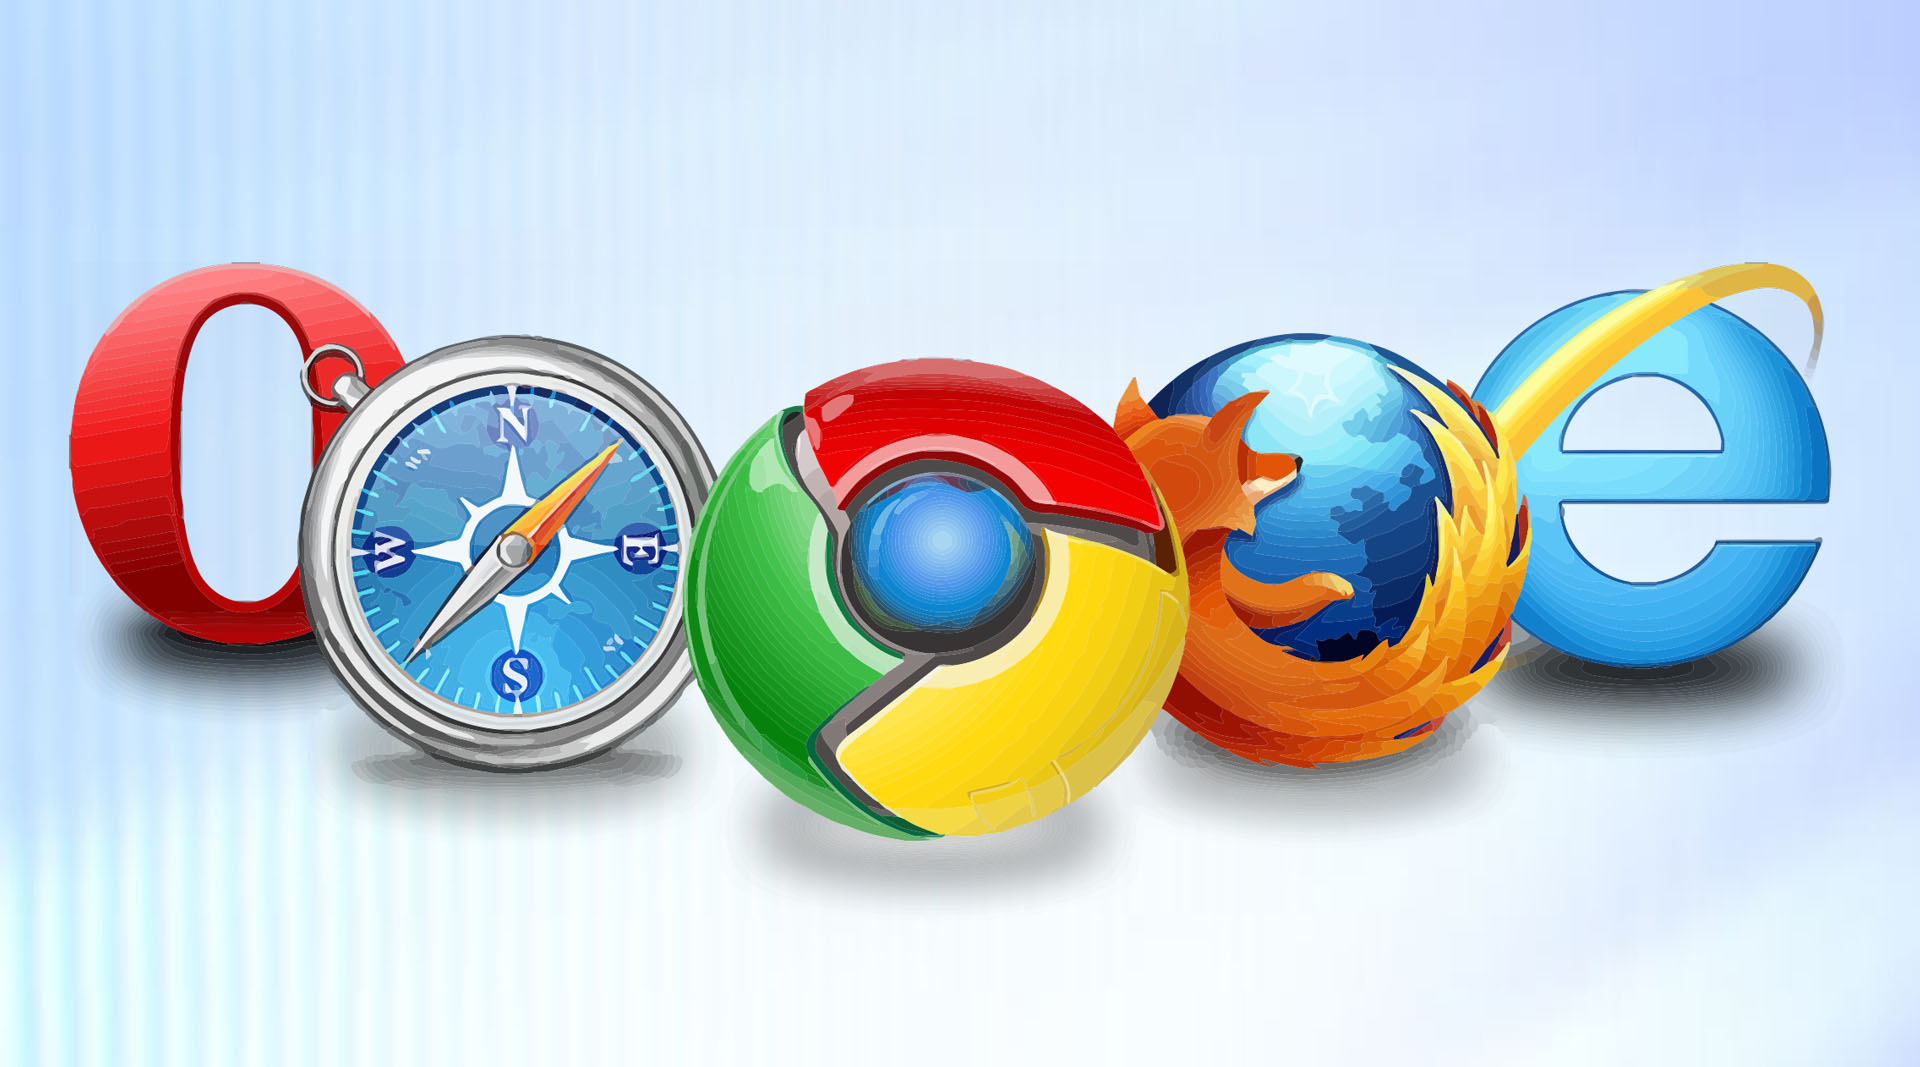 Which web browser are you using?